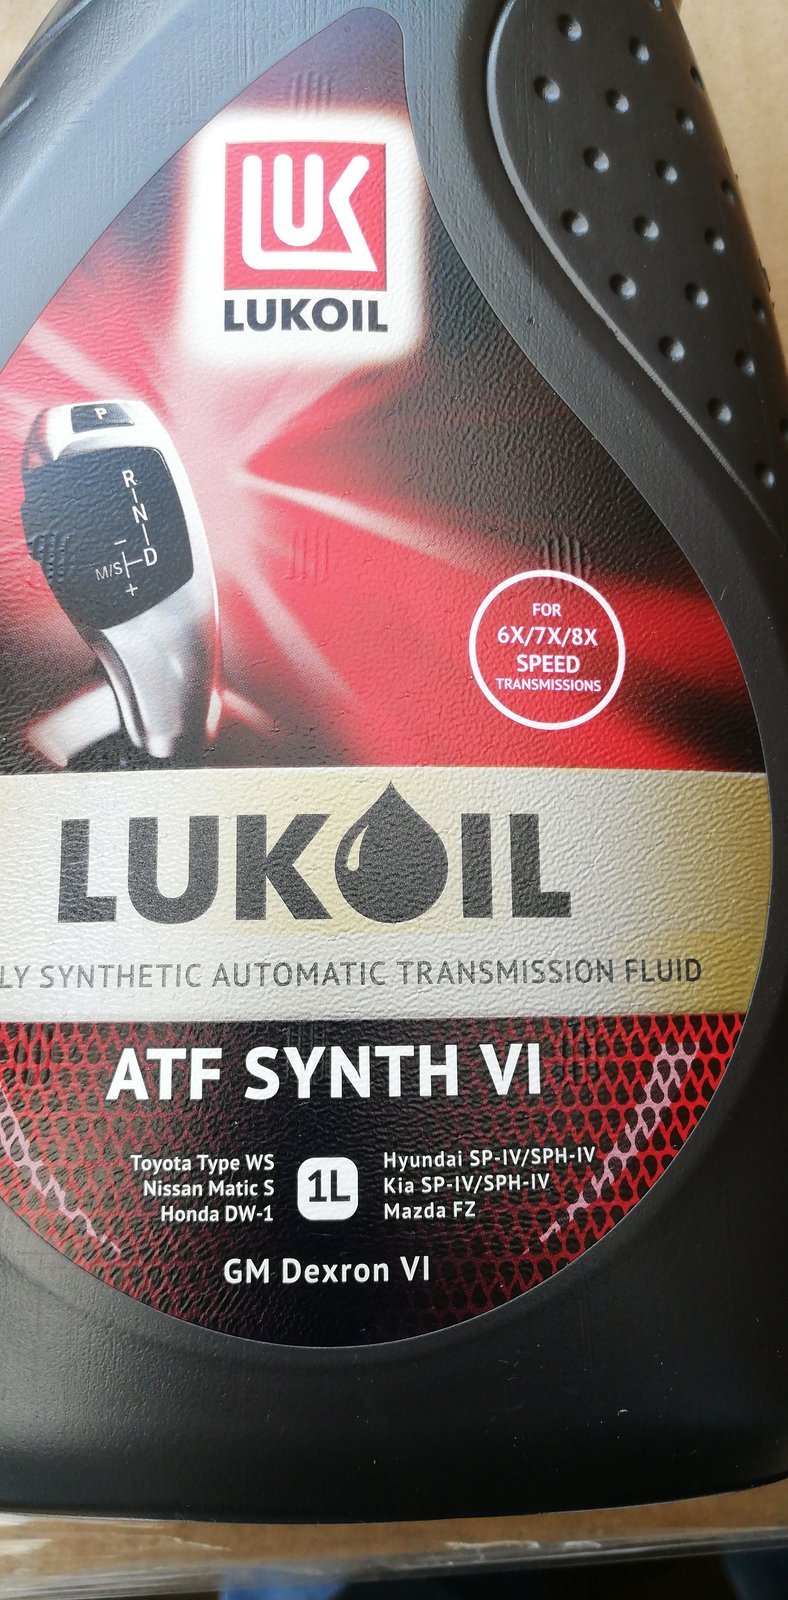 Atf synth vi. 3141993 Лукойл ATF Synth vi. Лукойл ATF Synth vi (20l). ATF 6 Lukoil. Лукойл ATF Synth vi 3141993 звет.